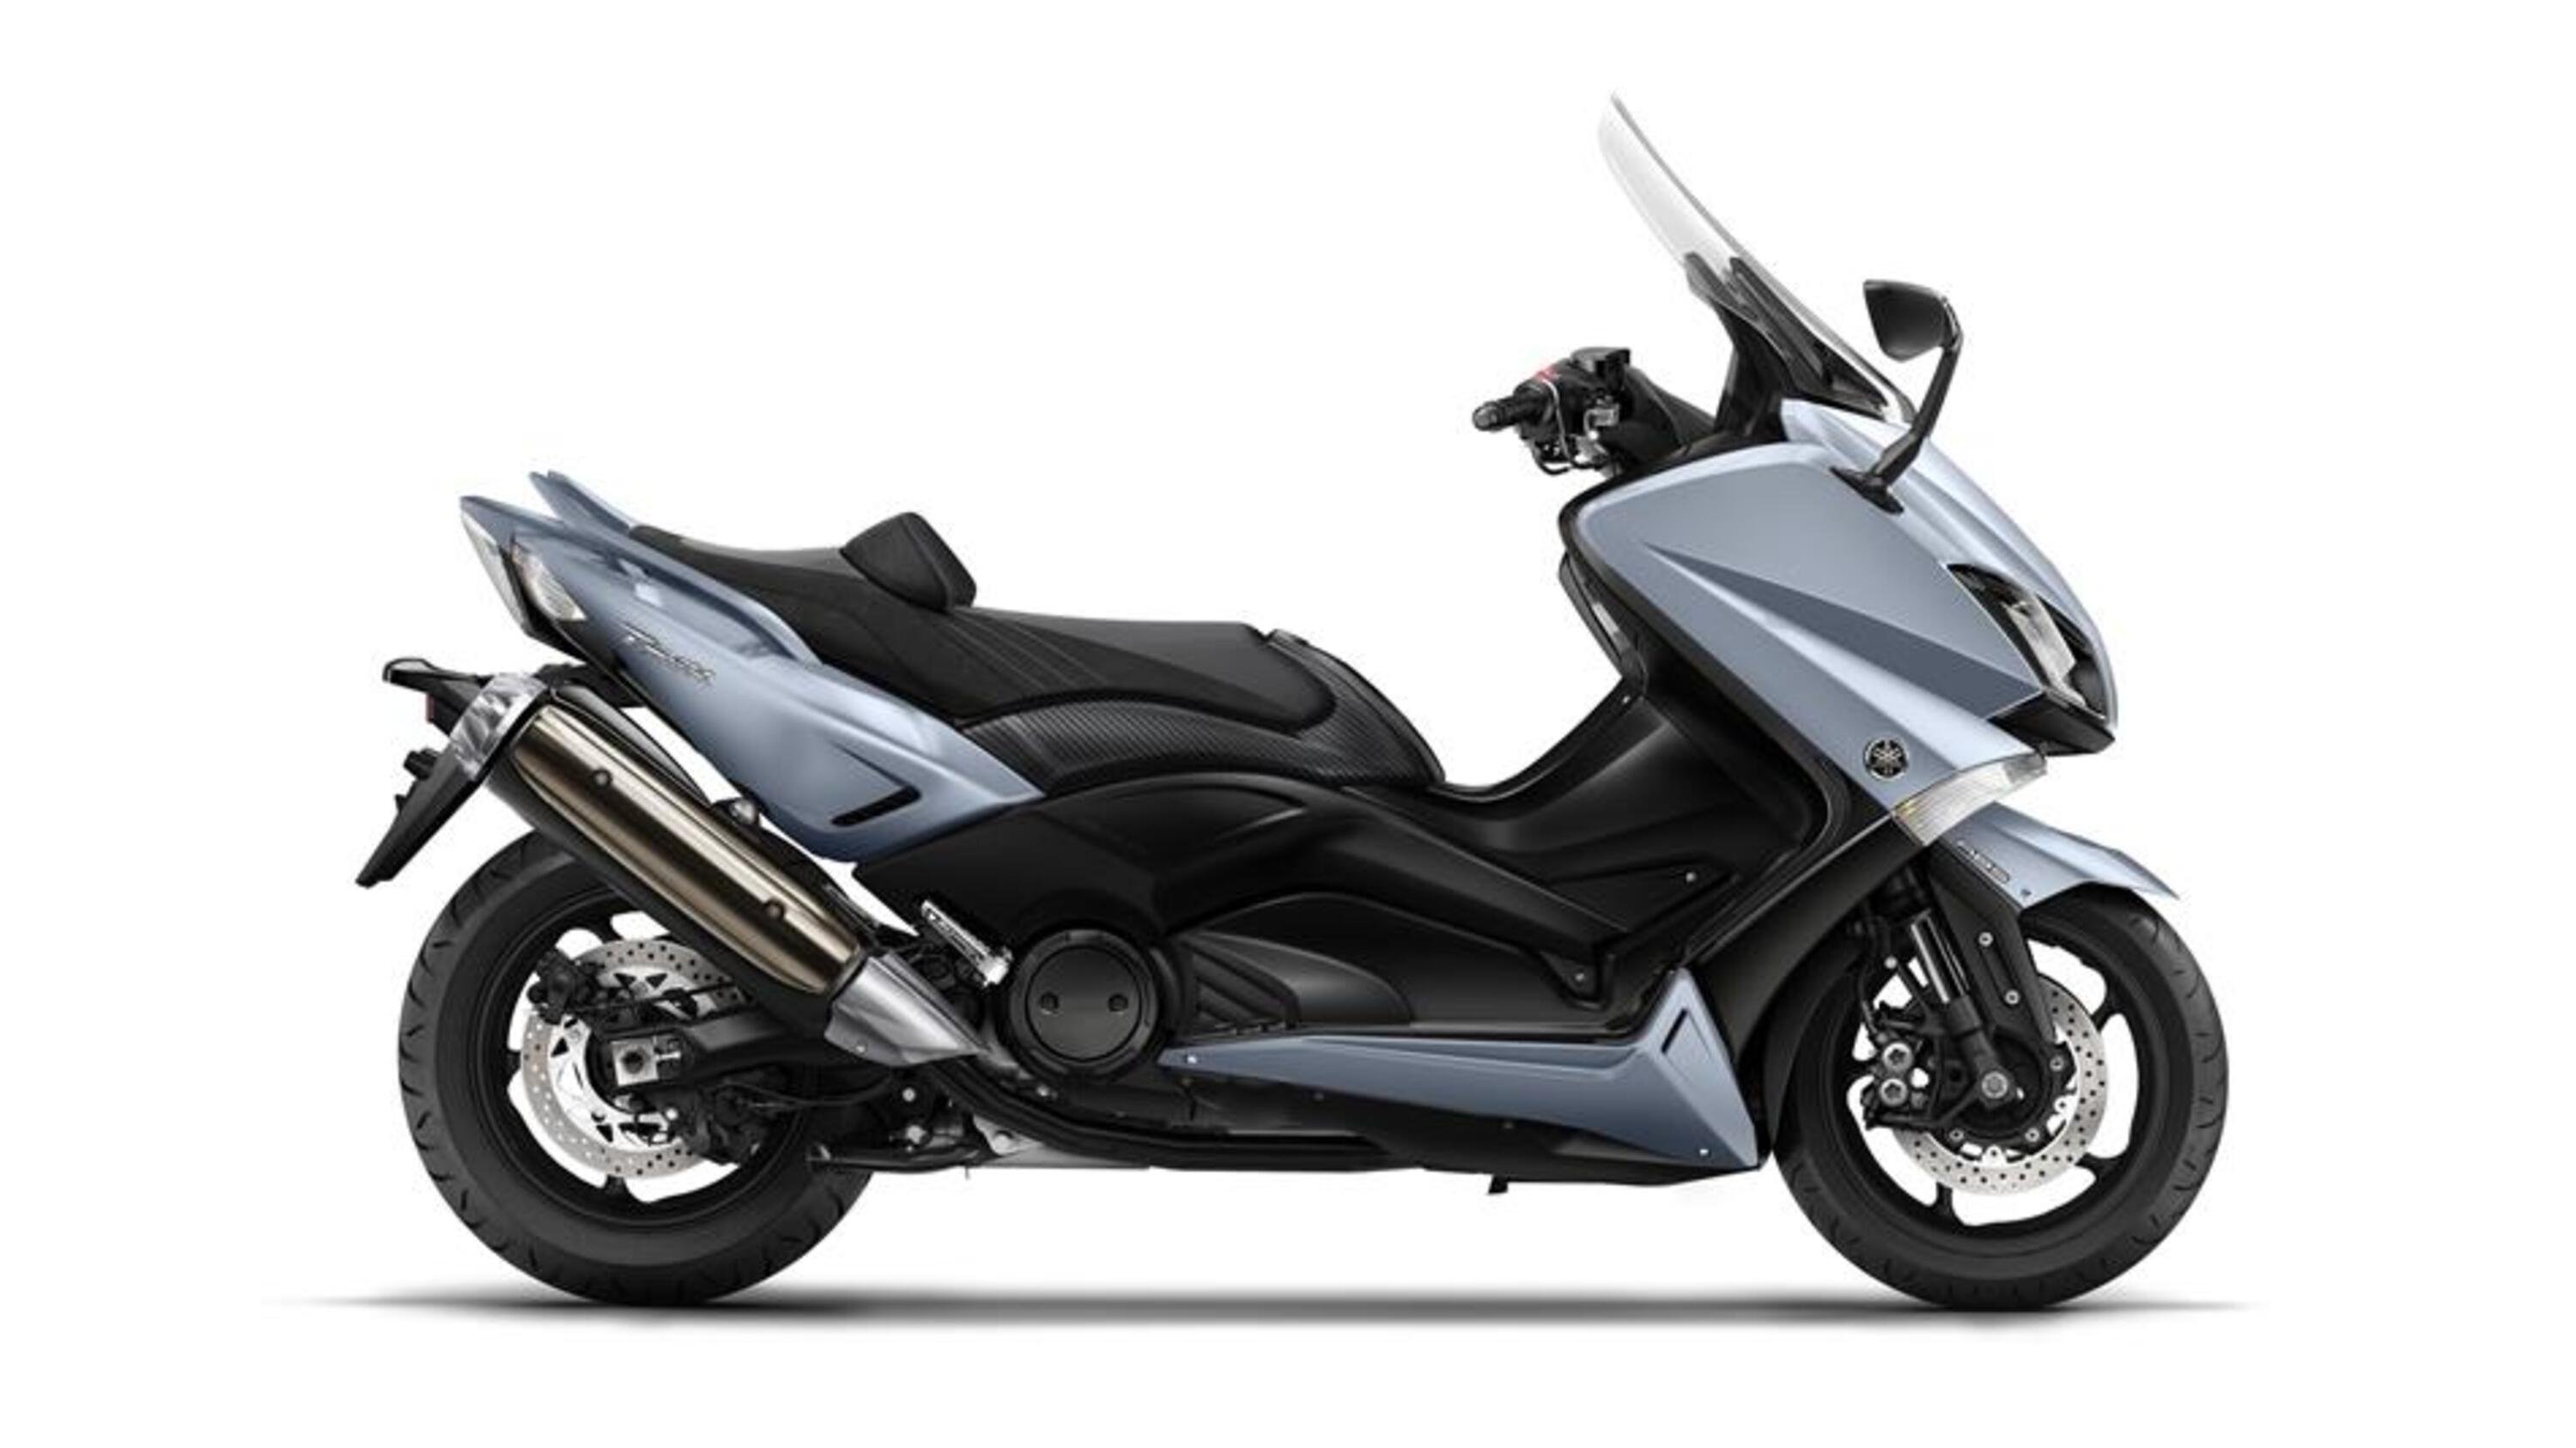 Yamaha T-Max 530 T-Max 530 Lux Max ABS (2016 - 17)